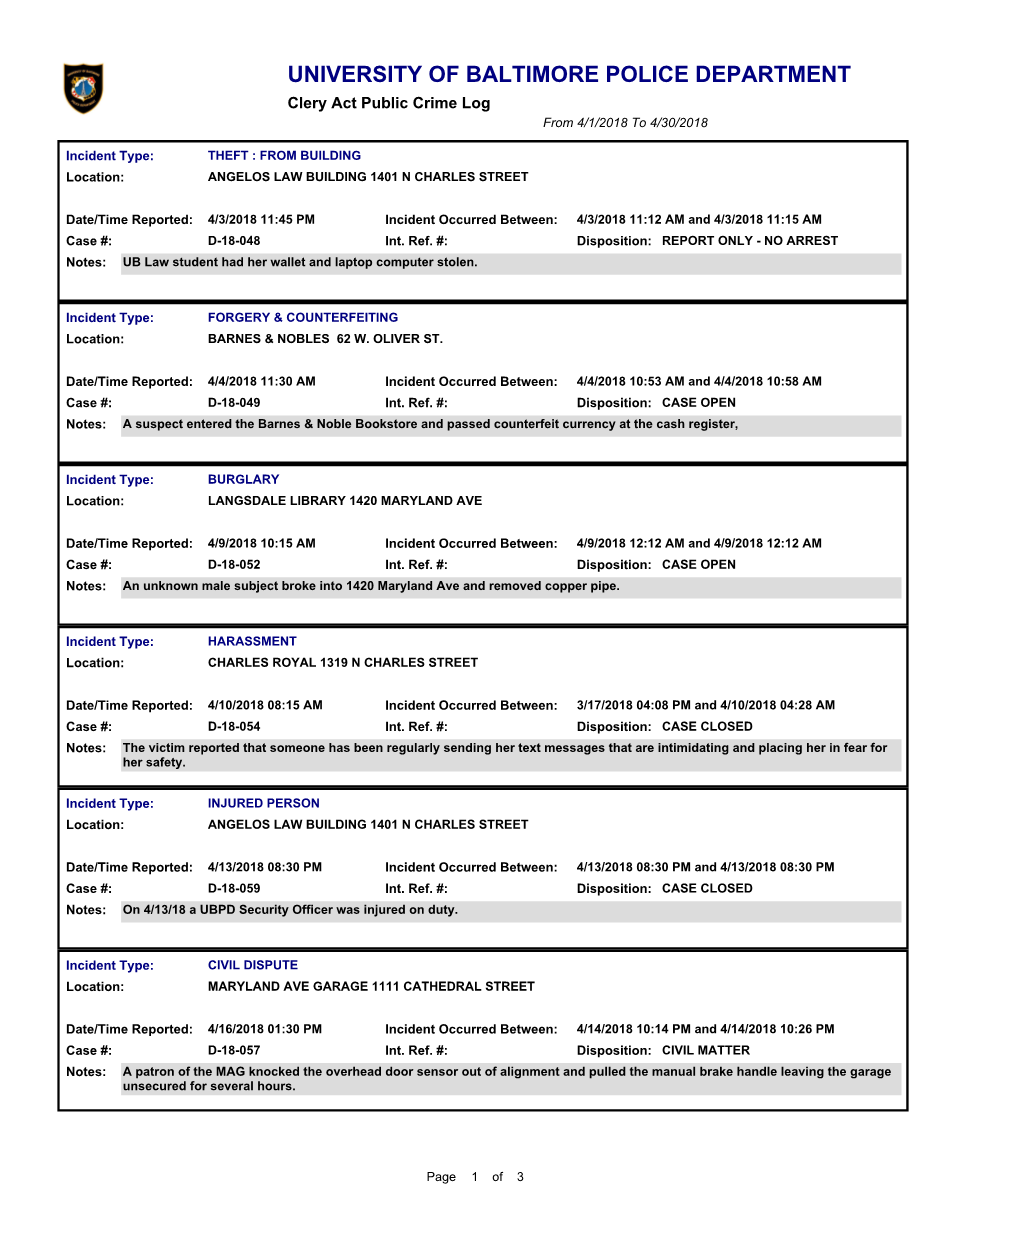 UNIVERSITY of BALTIMORE POLICE DEPARTMENT Clery Act Public Crime Log from 4/1/2018 to 4/30/2018